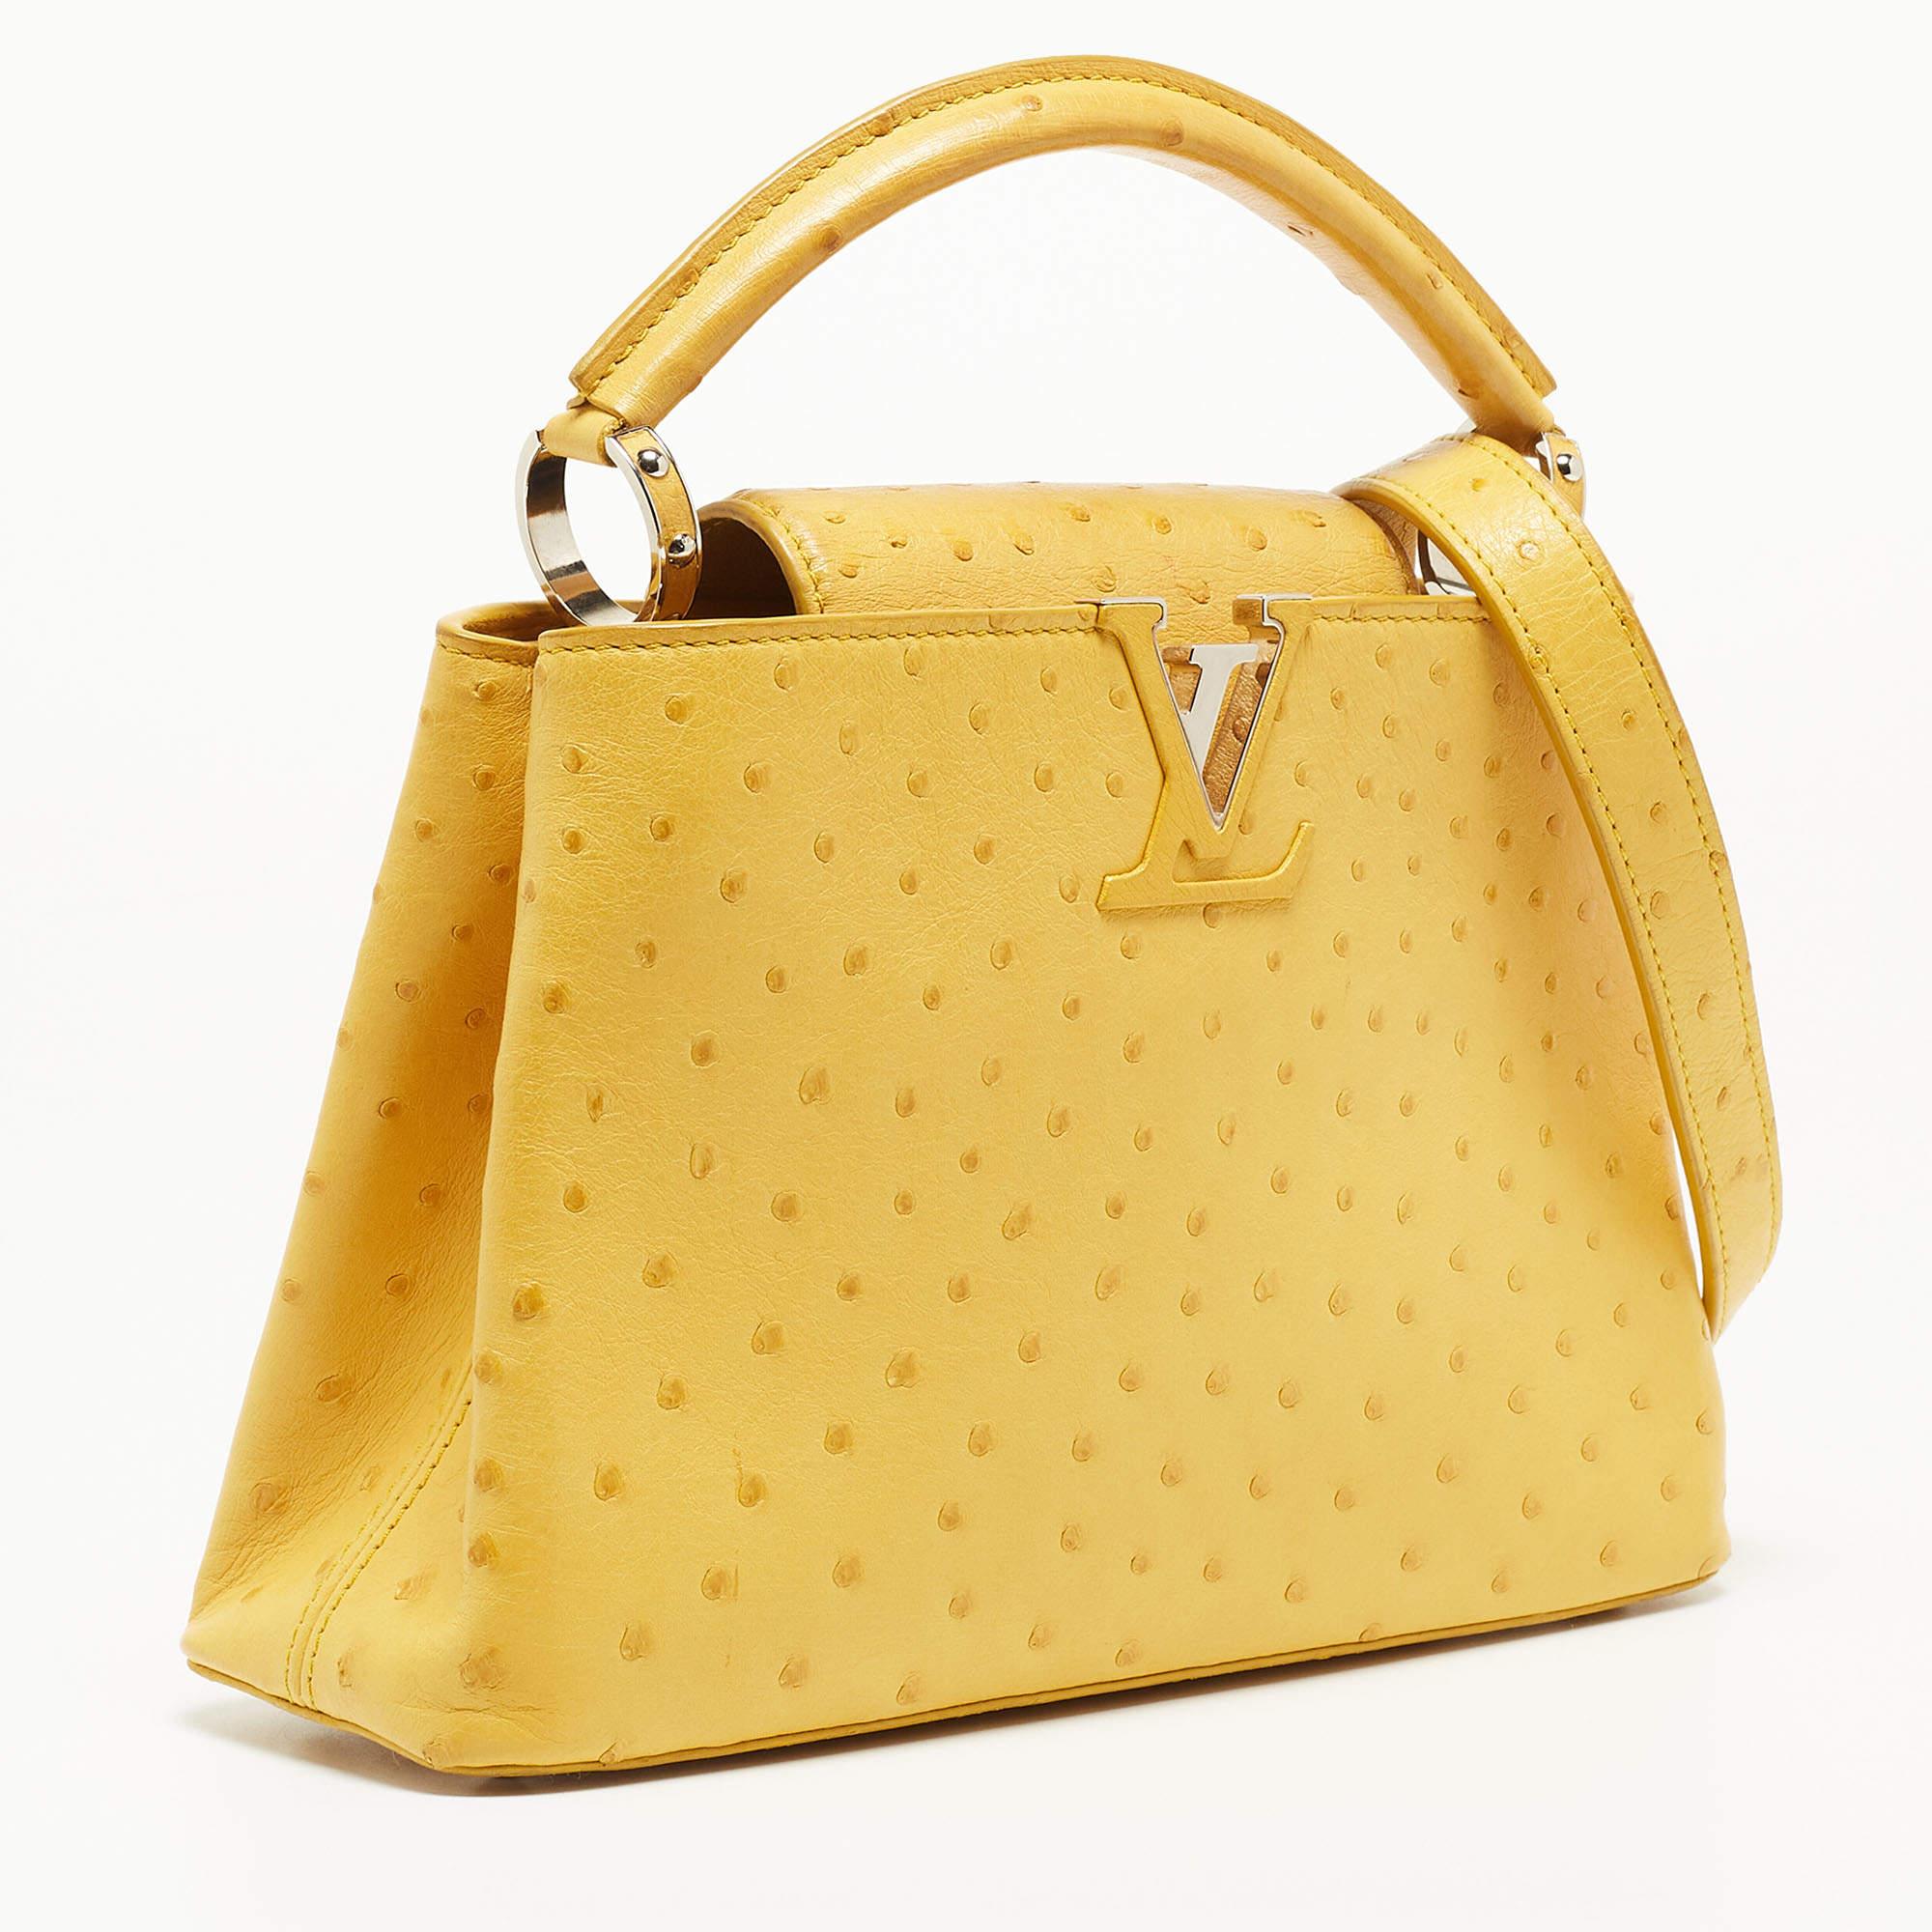 Designer bags are ideal companions for ample occasions! Here we have a fashion-meets-functionality piece crafted with precision. This Capucines BB bag by LV has been equipped with a well-sized interior that can easily fit all your essentials.

